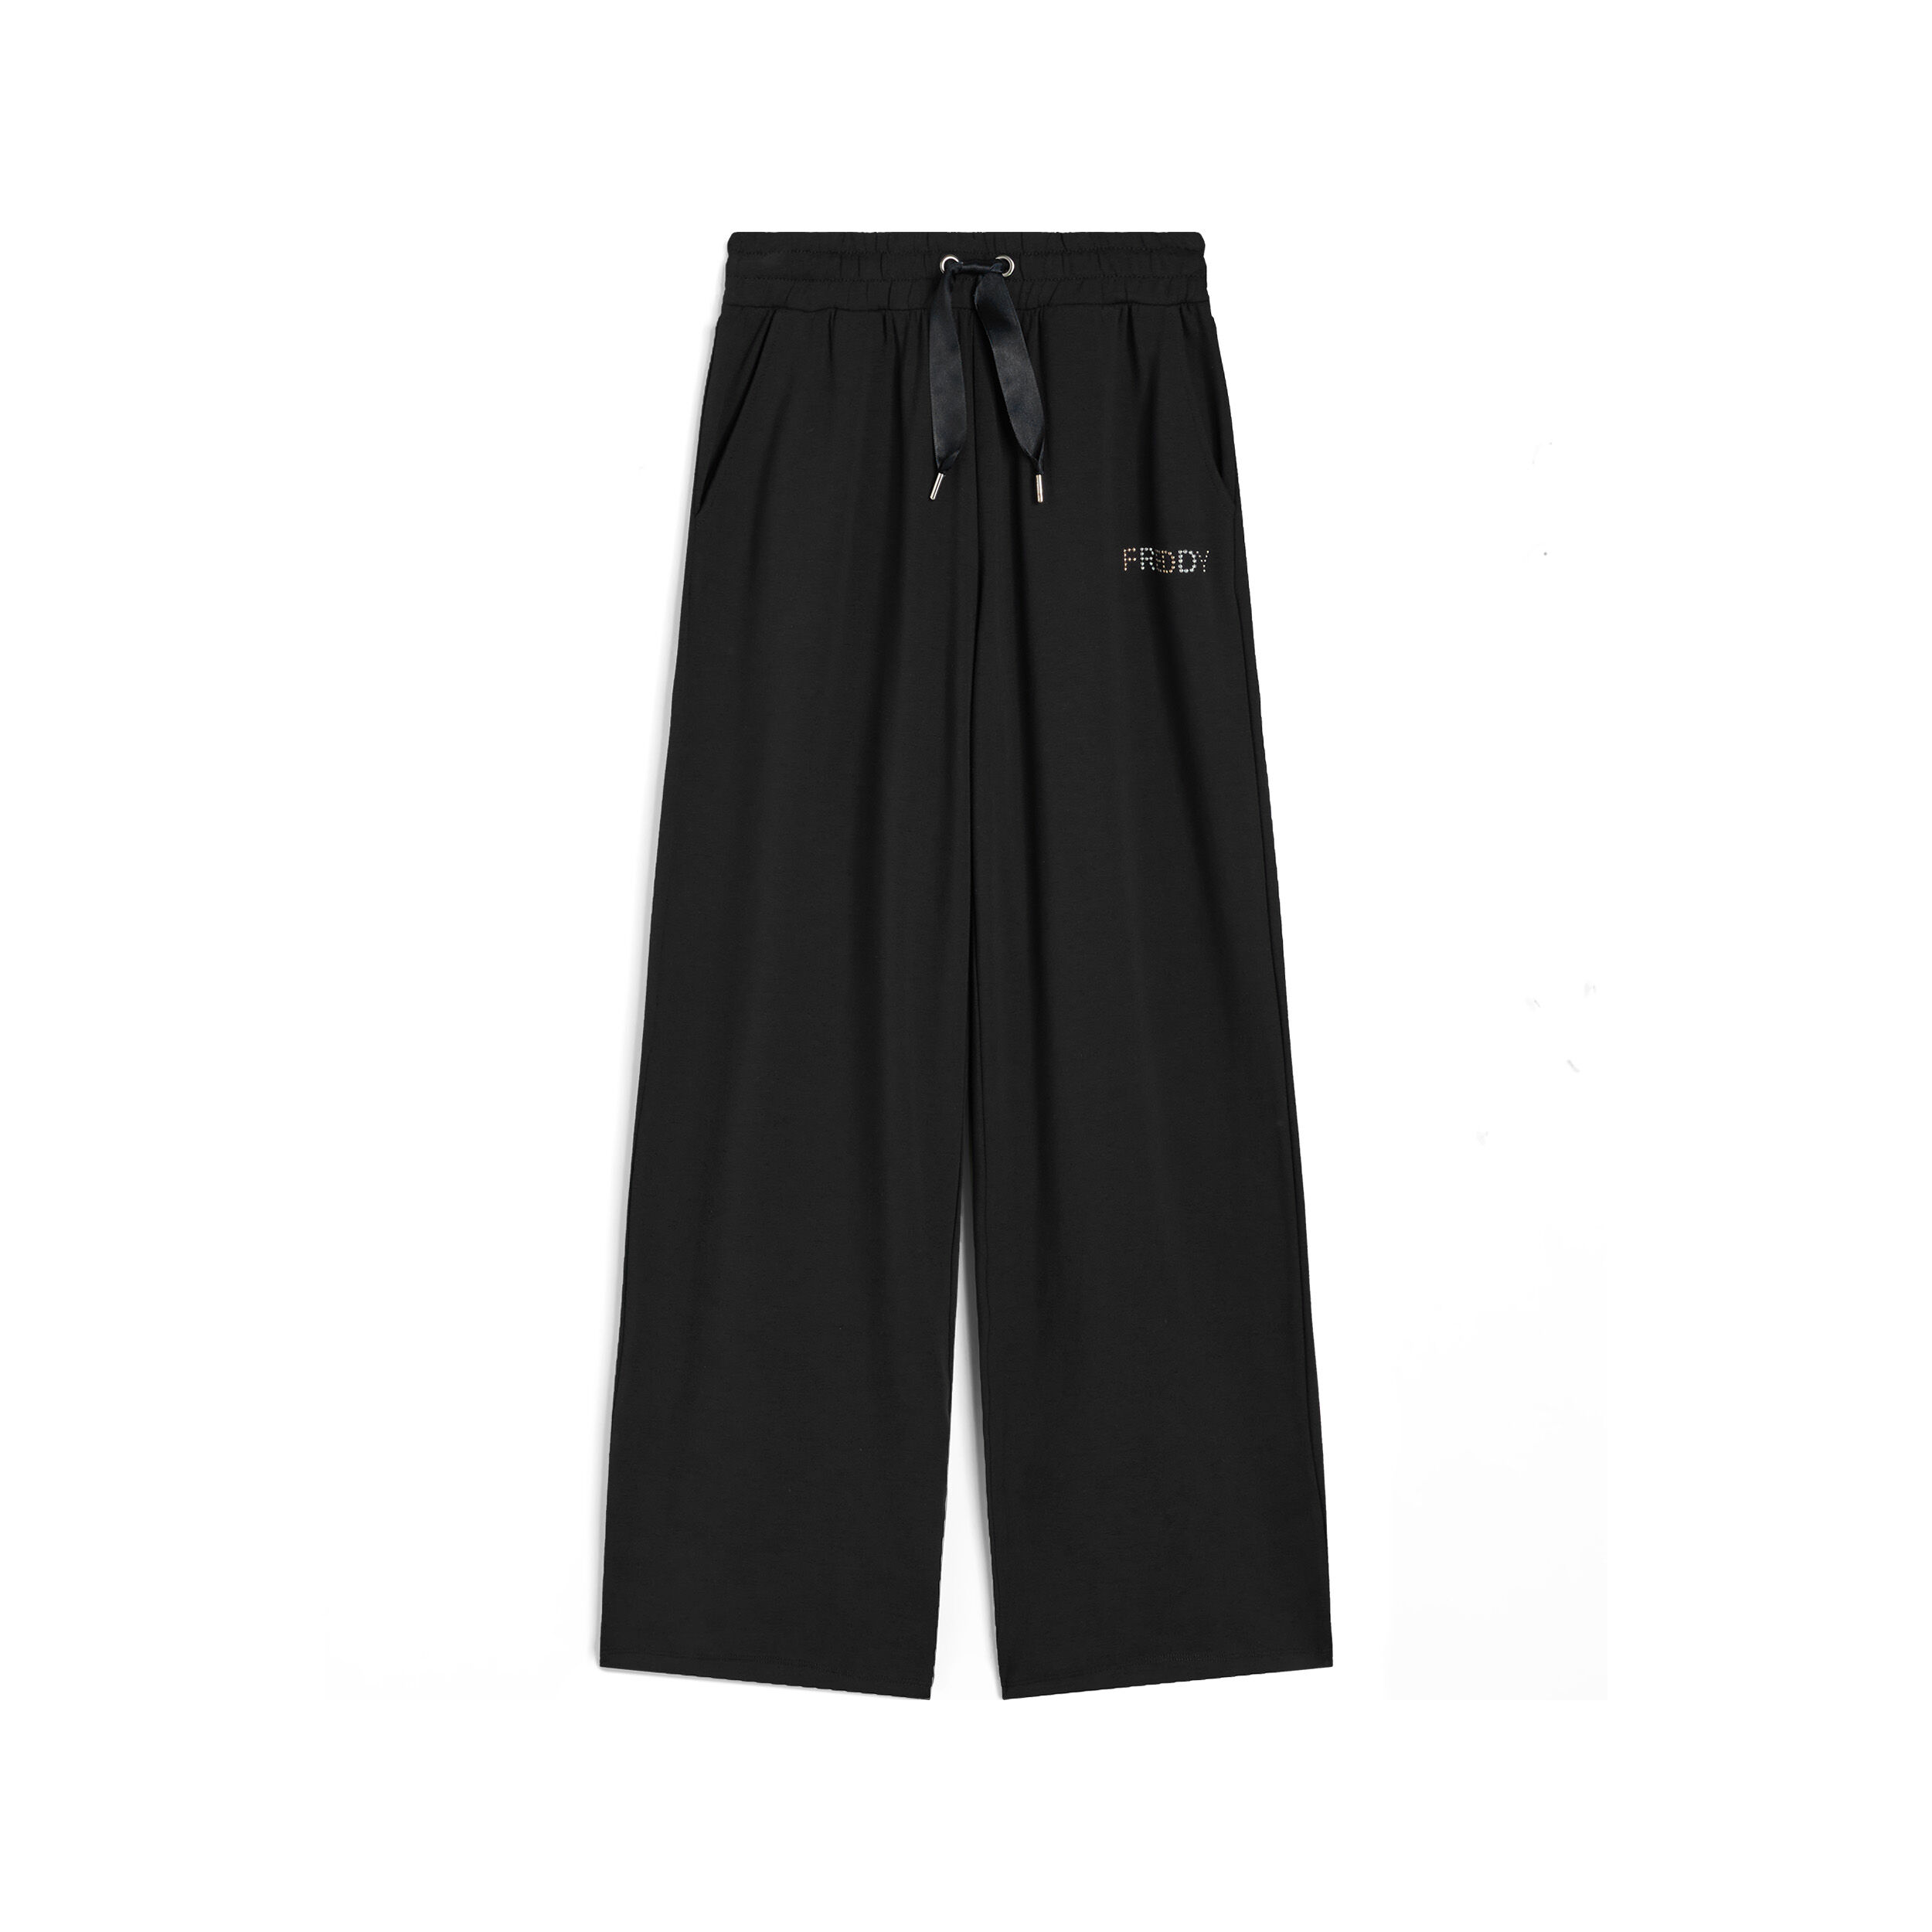 Freddy Pantaloni donna in french terry modal con gamba dritta Nero Donna Extra Large